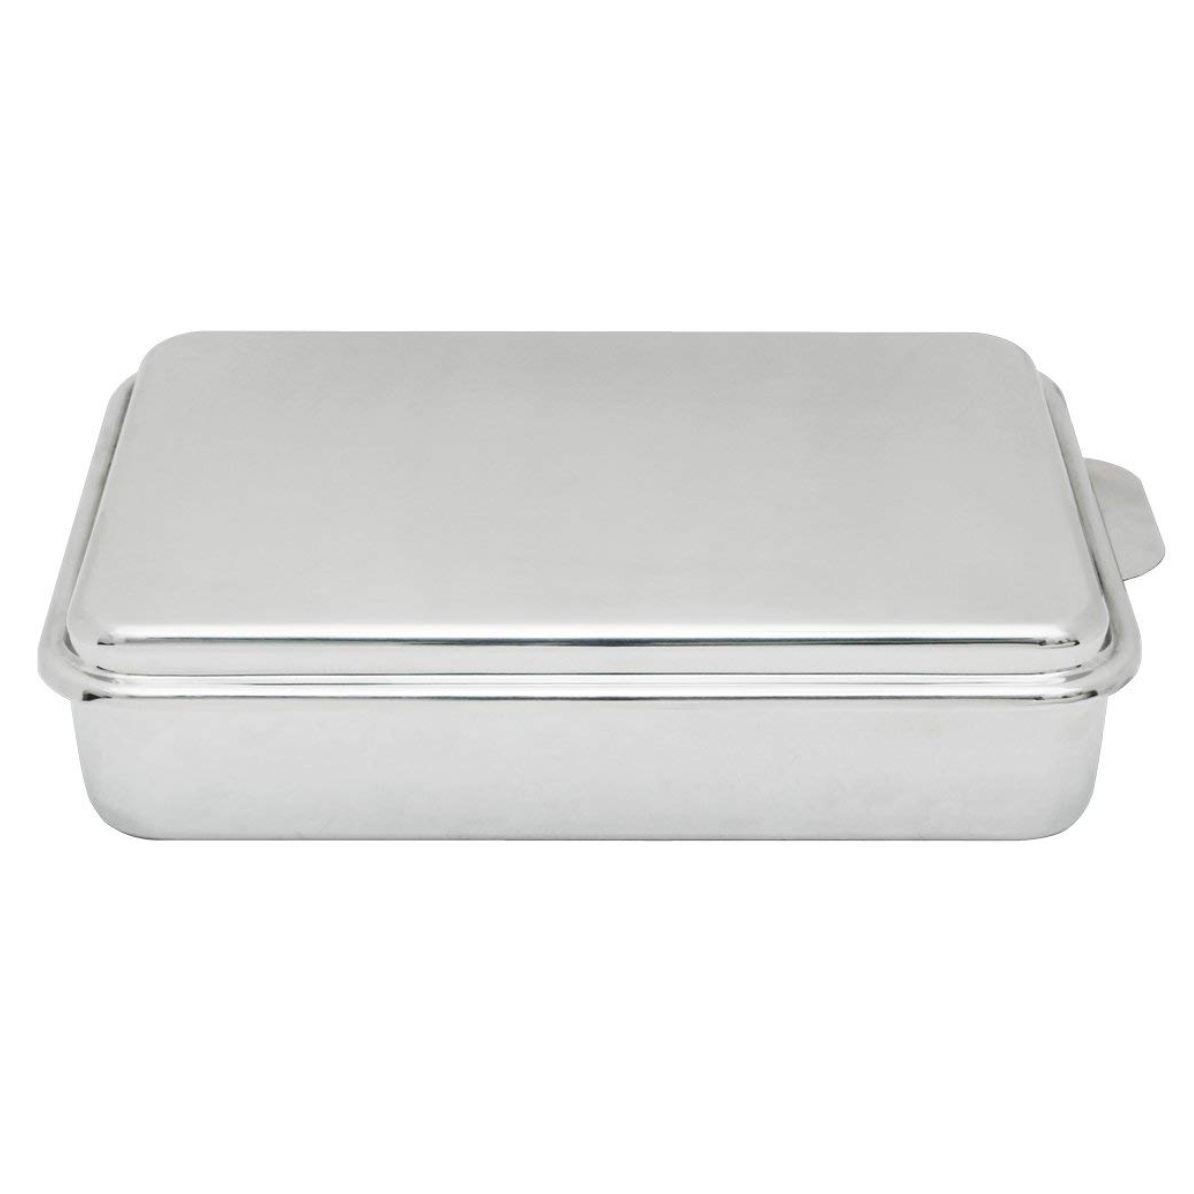 Stainless steel cake pan with lid